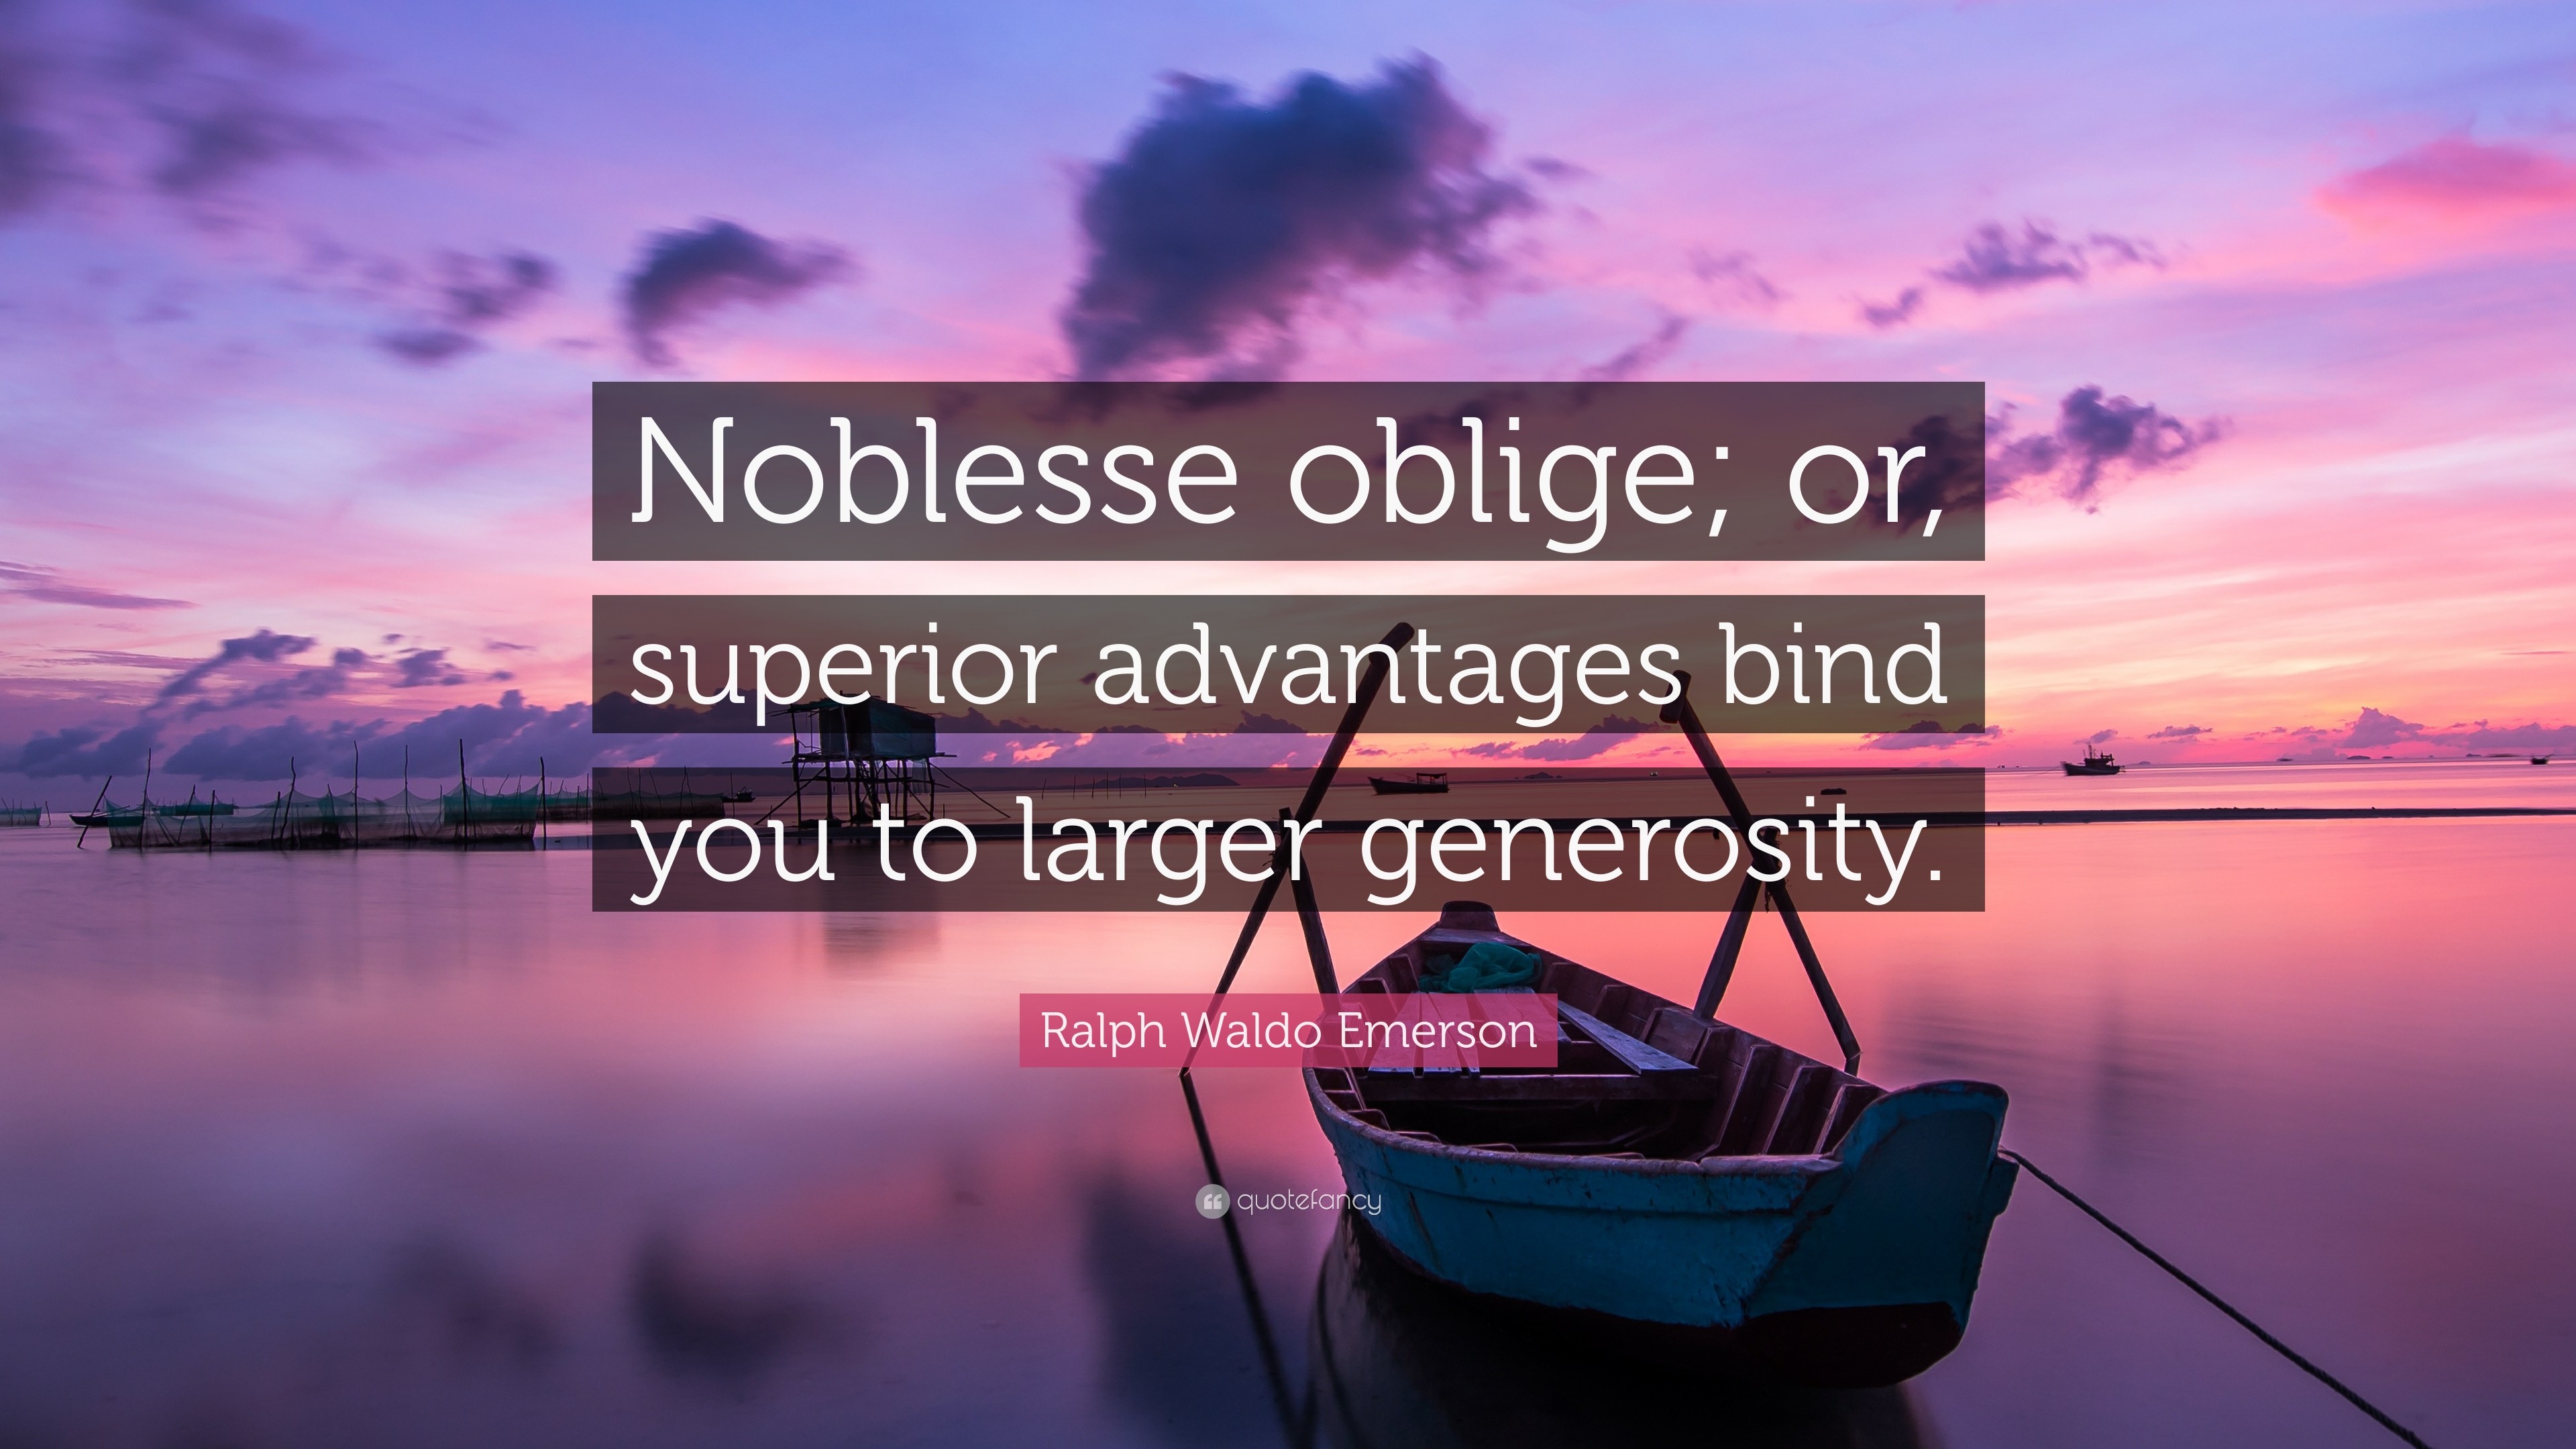 3840x2160 Ralph Waldo Emerson Quote: “Noblesse oblige; or, superior advantages bind  you to